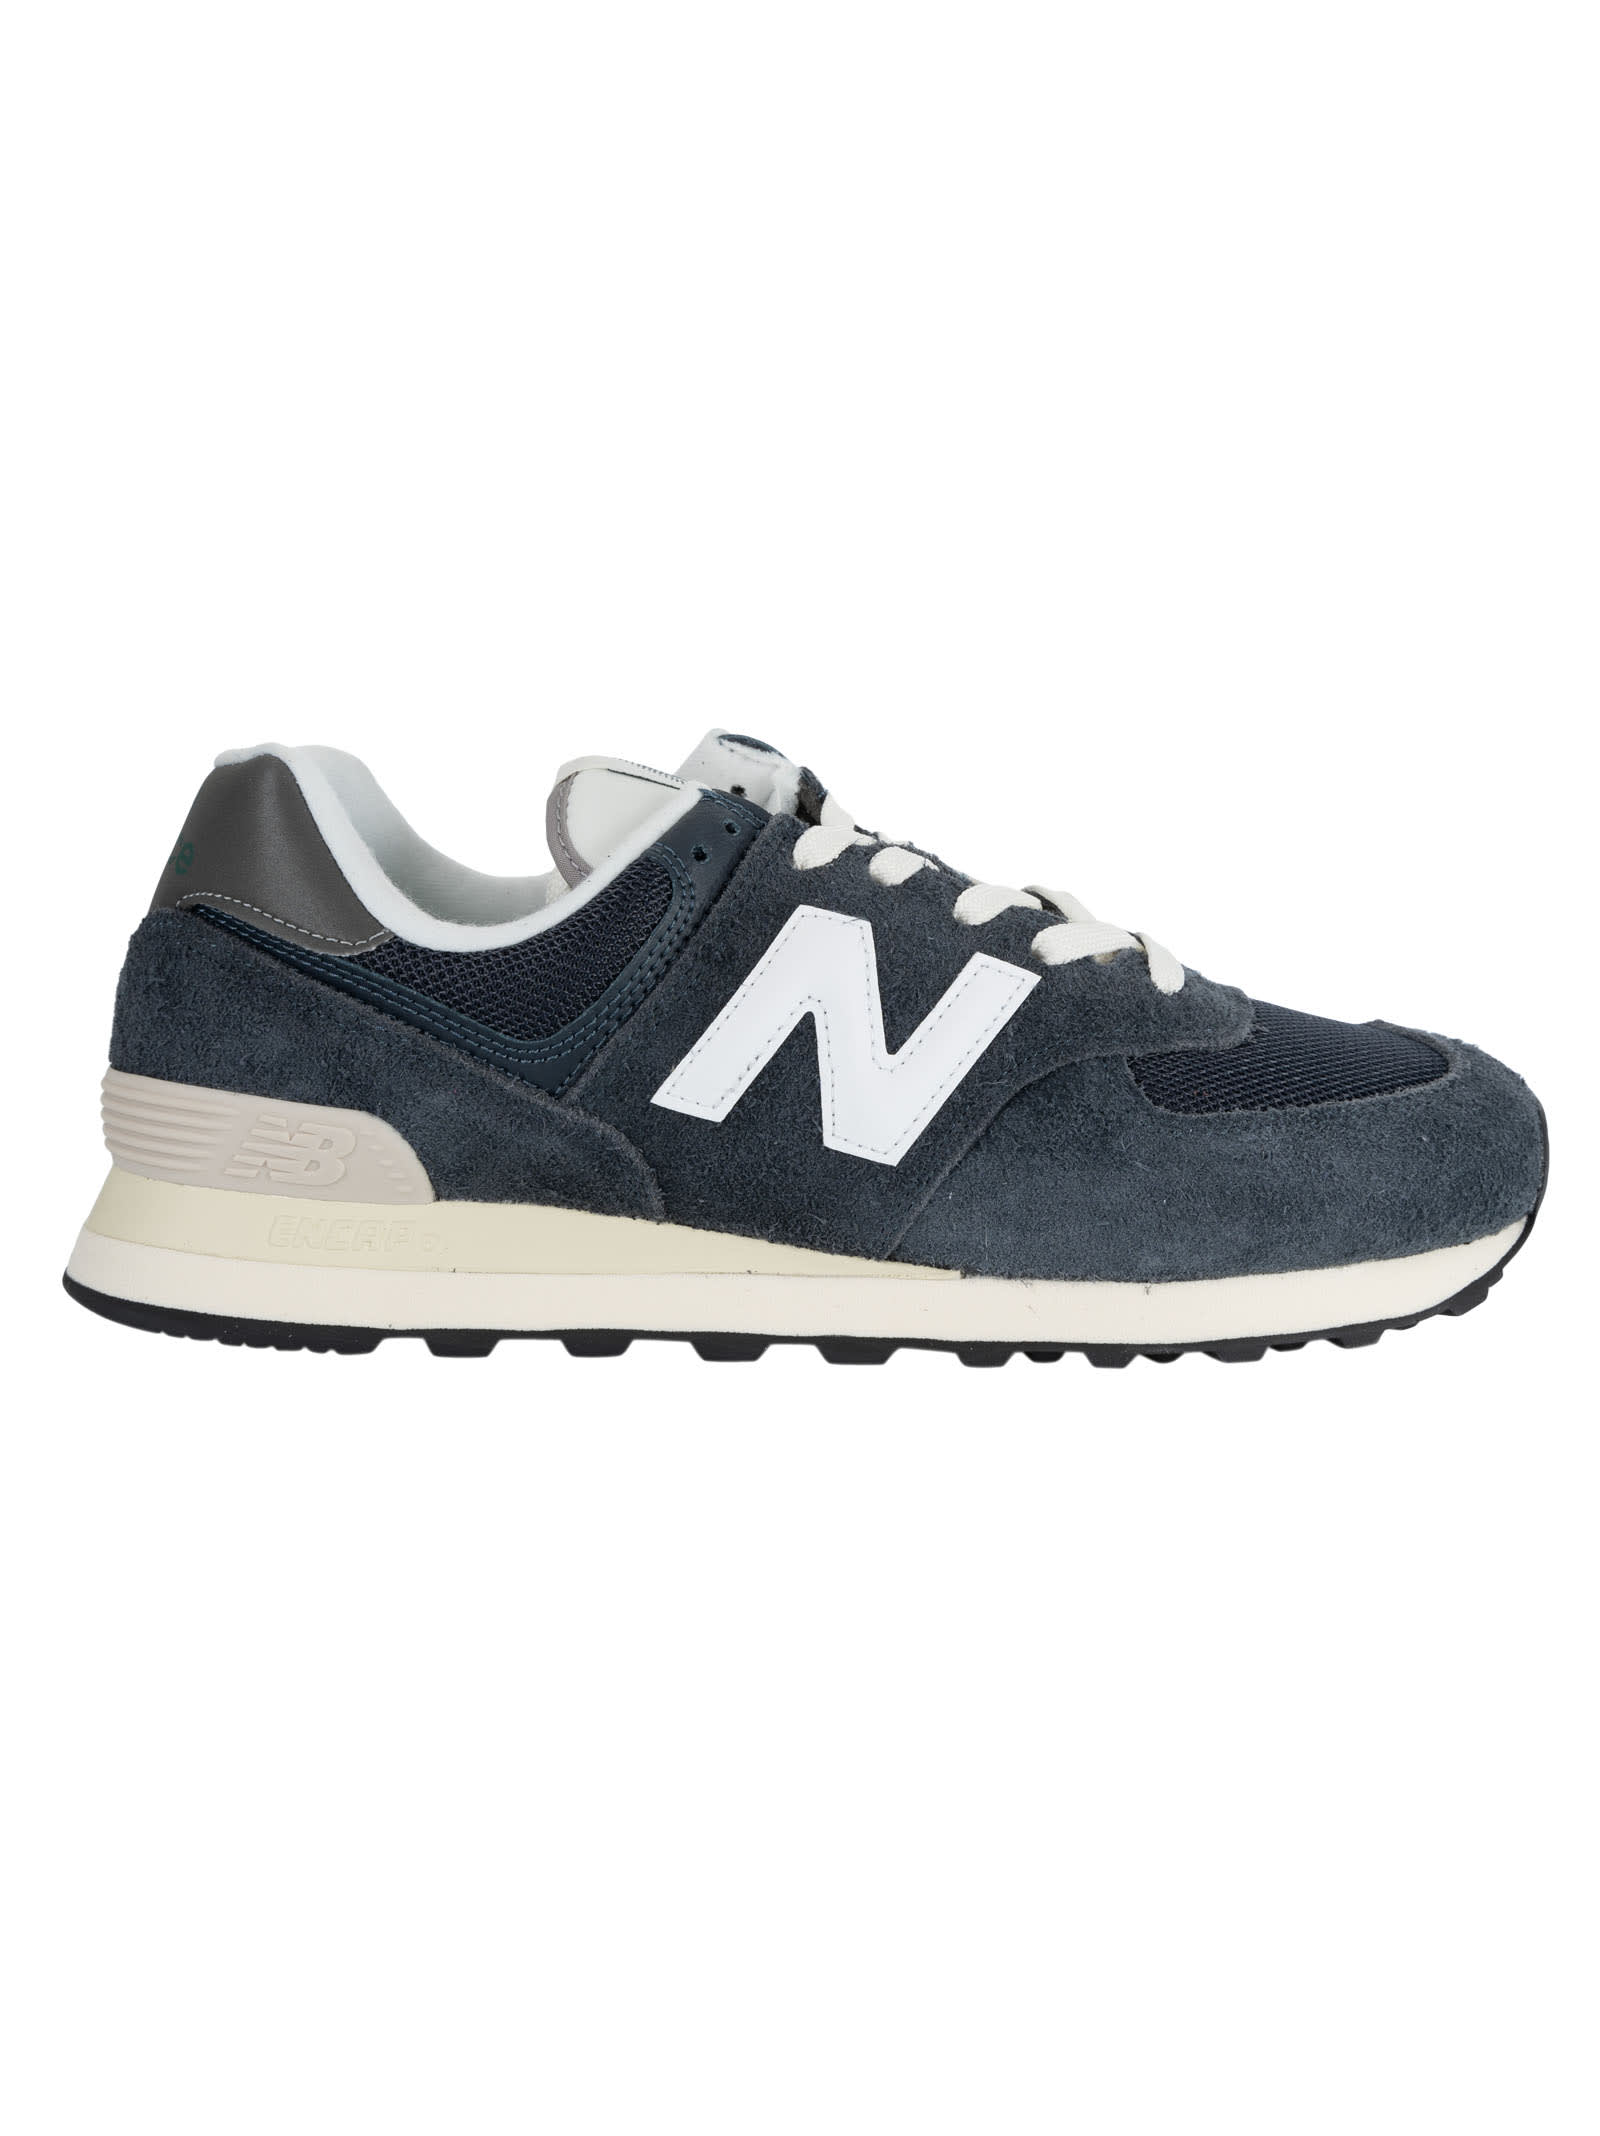 New Balance Logo Sided Mesh Front Sneakers